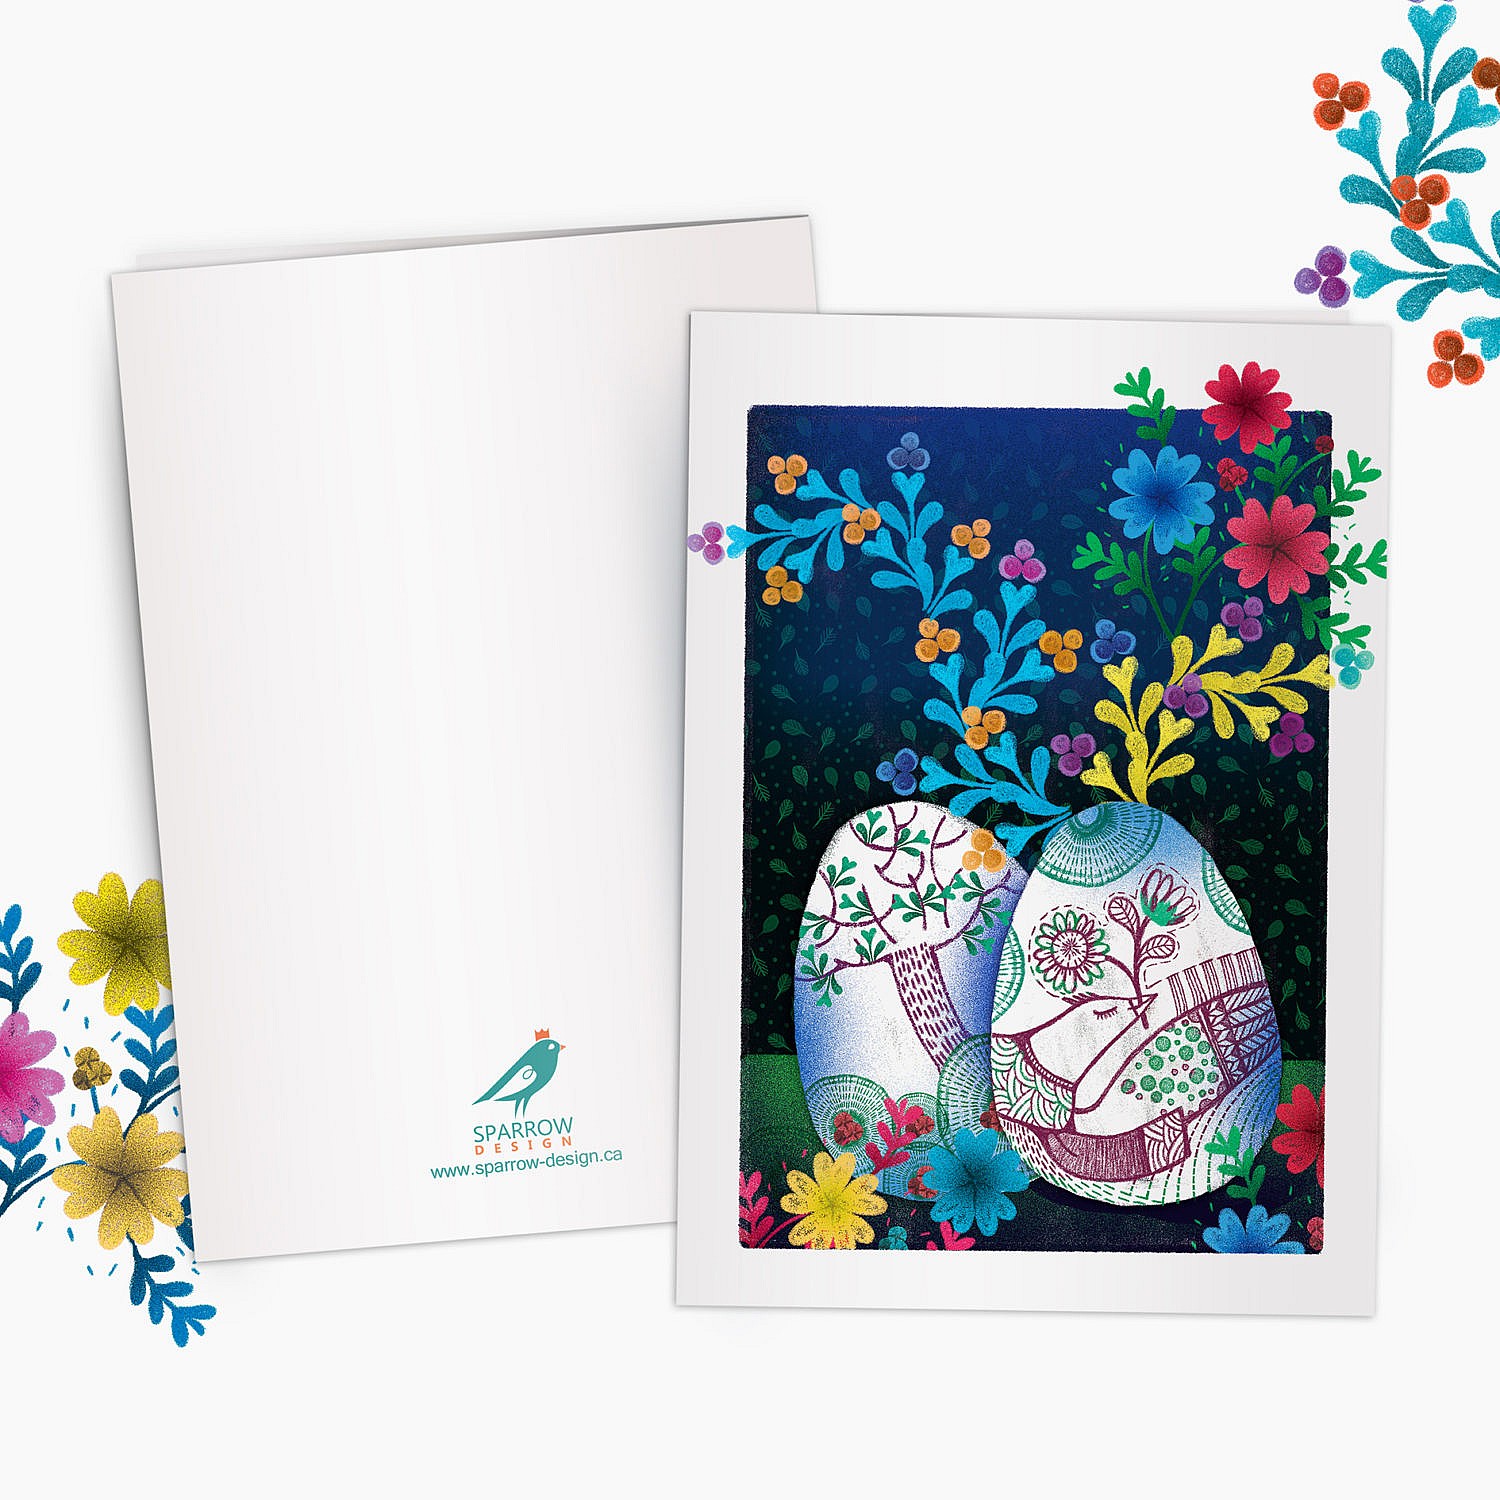 The image is showing a spring scenery. Two painted eggs are in the foreground. The painting on eggs is showing a bird. On the background there are colorful flowers. This greeting card is perfect for nowruz festival.